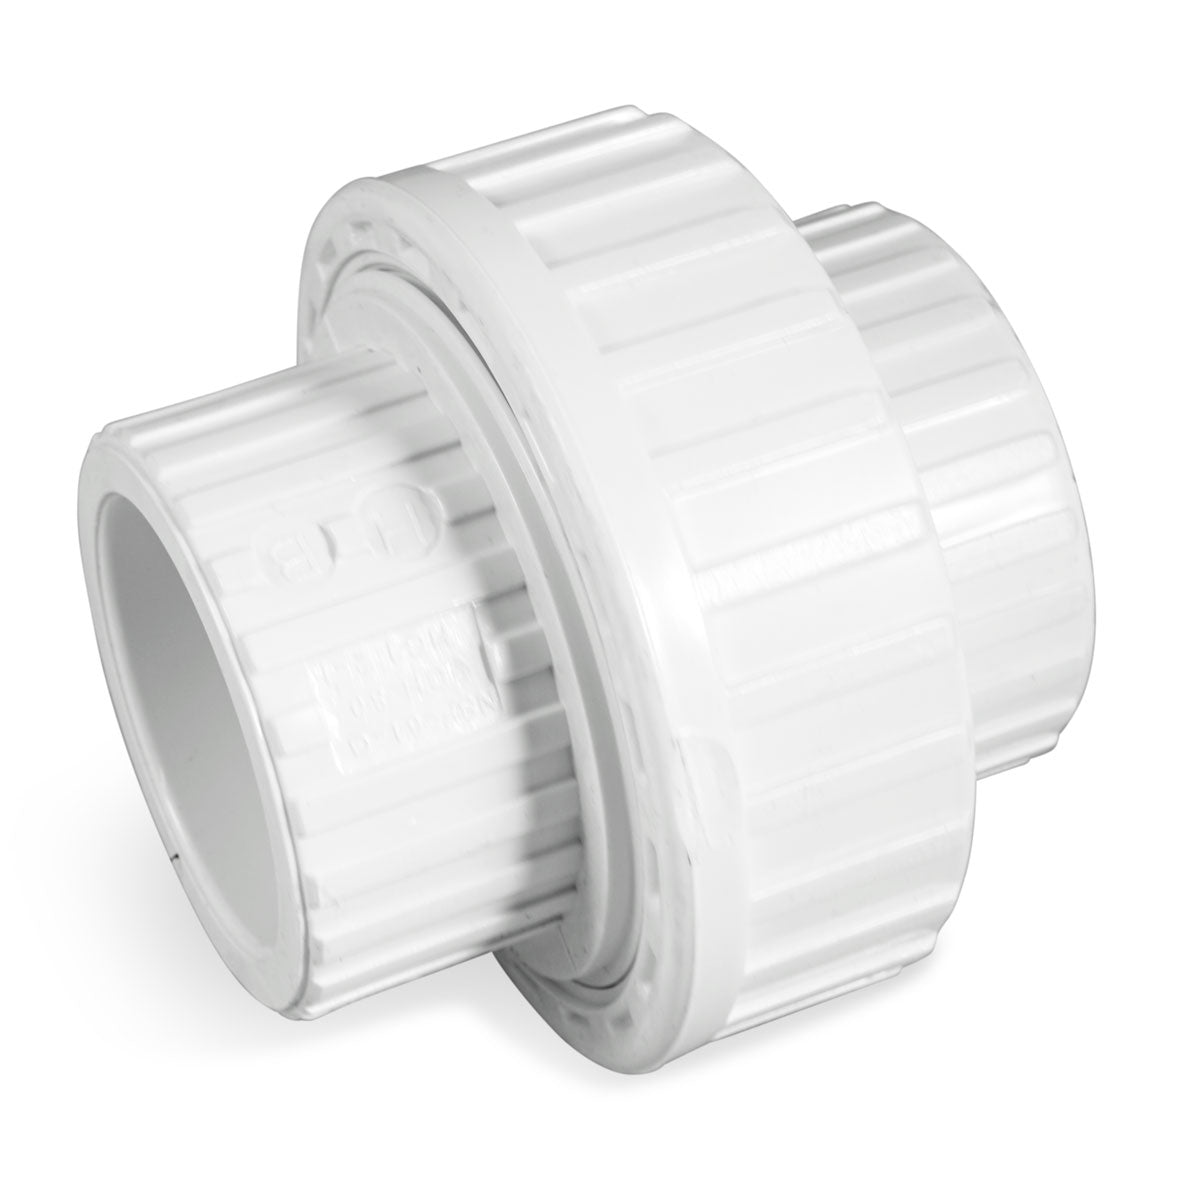 Ring Type Pvc Pipe Fitting Dealers in Mumbai - Dealers, Manufacturers &  Suppliers -Justdial